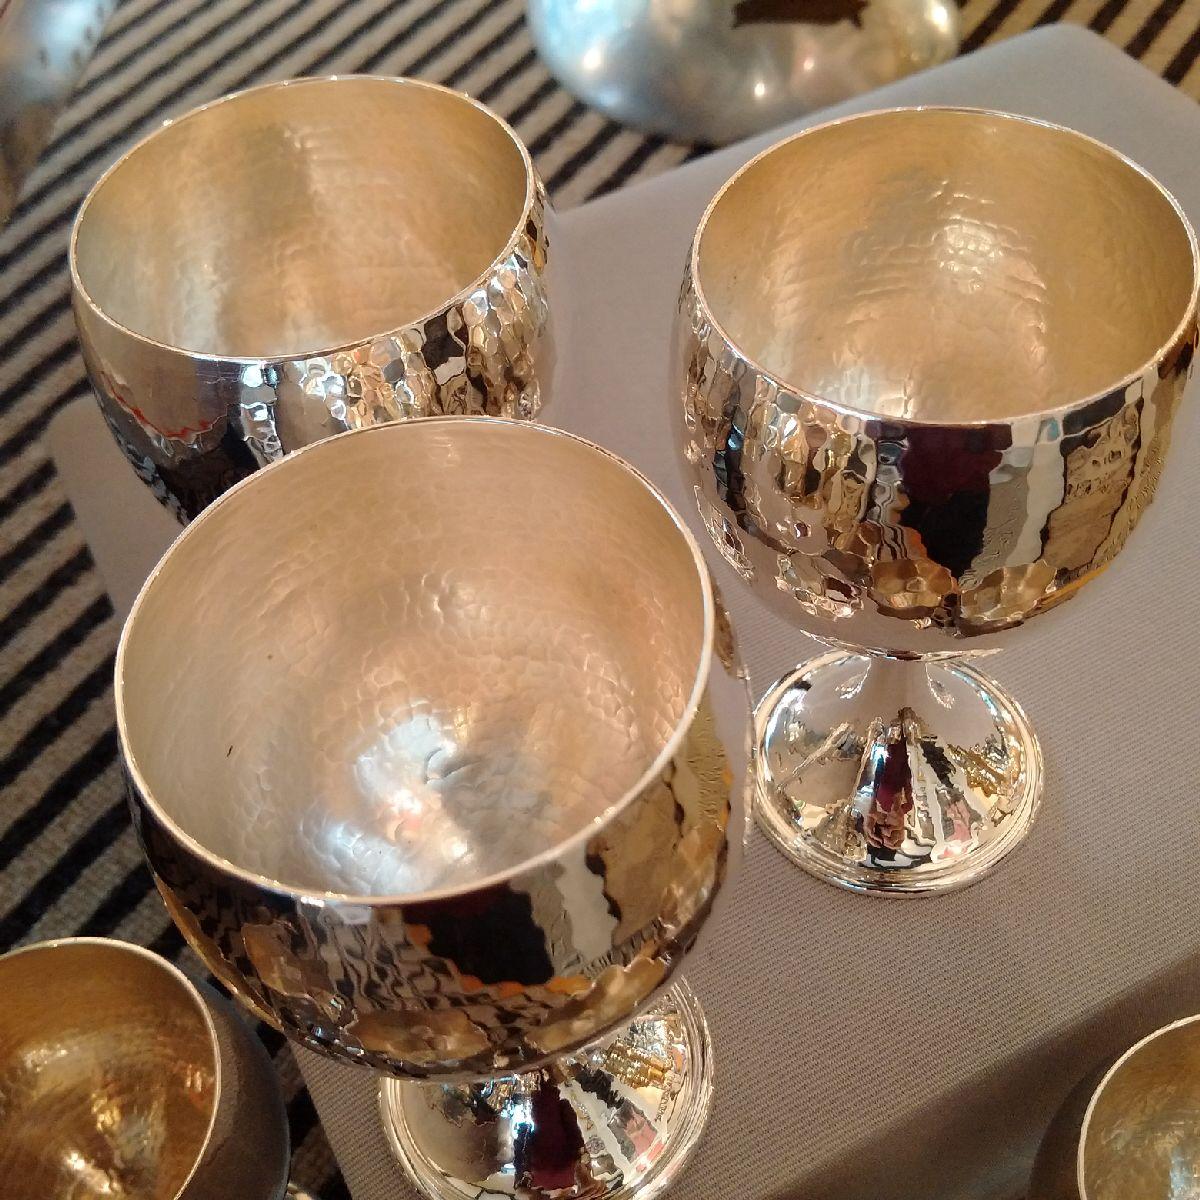 Buccellati, Italy.

A set of eight handmade Sterling silver stemmed Champagne or wine goblets by Buccellati, each goblet with a plain, swept foot and the bowl in a hammered or martelé finish, in pristine and seemingly unused condition. Each